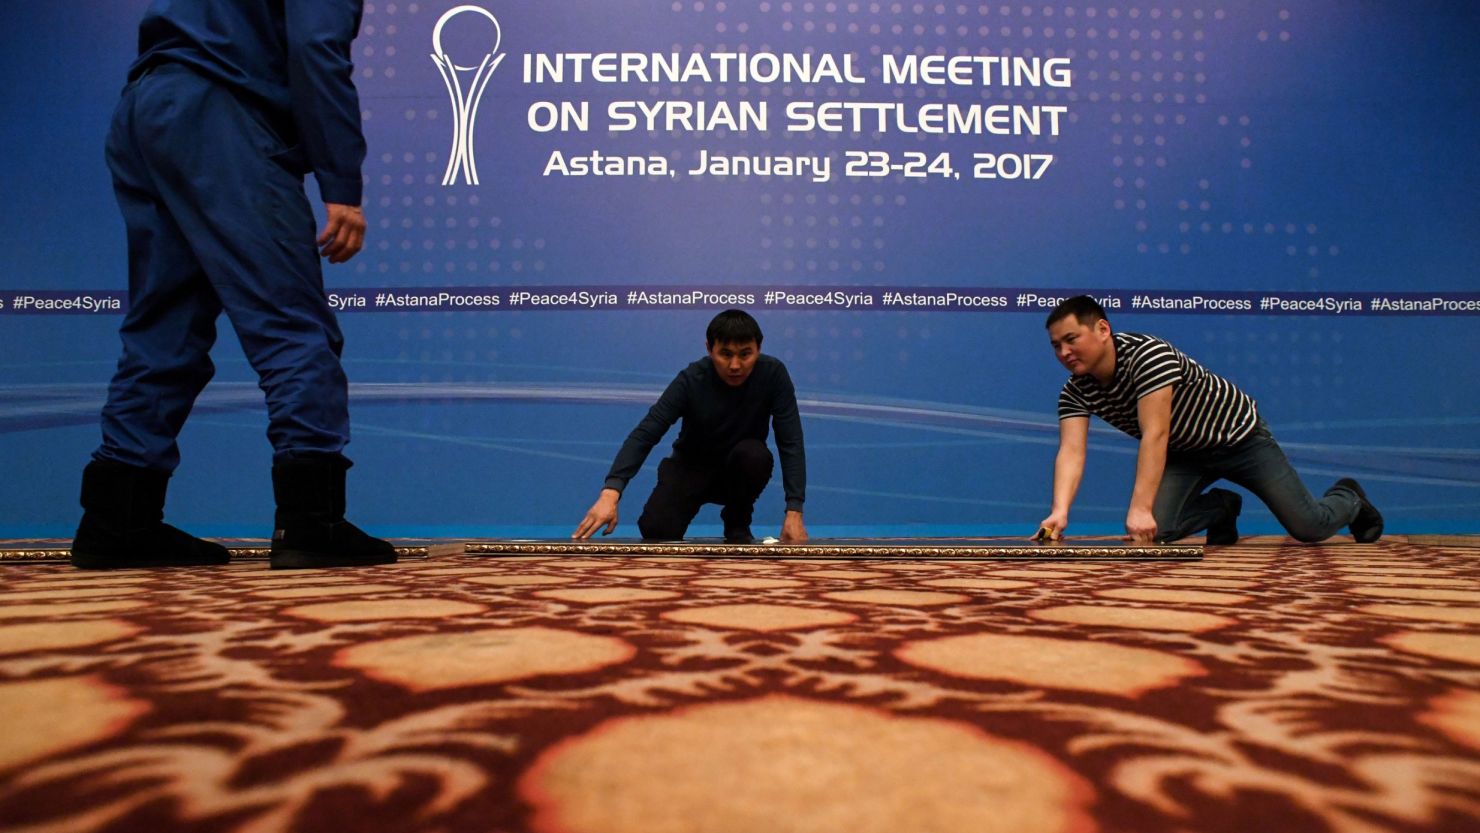 The peace talks are being held in Kazakhstan's capital city, Astana.